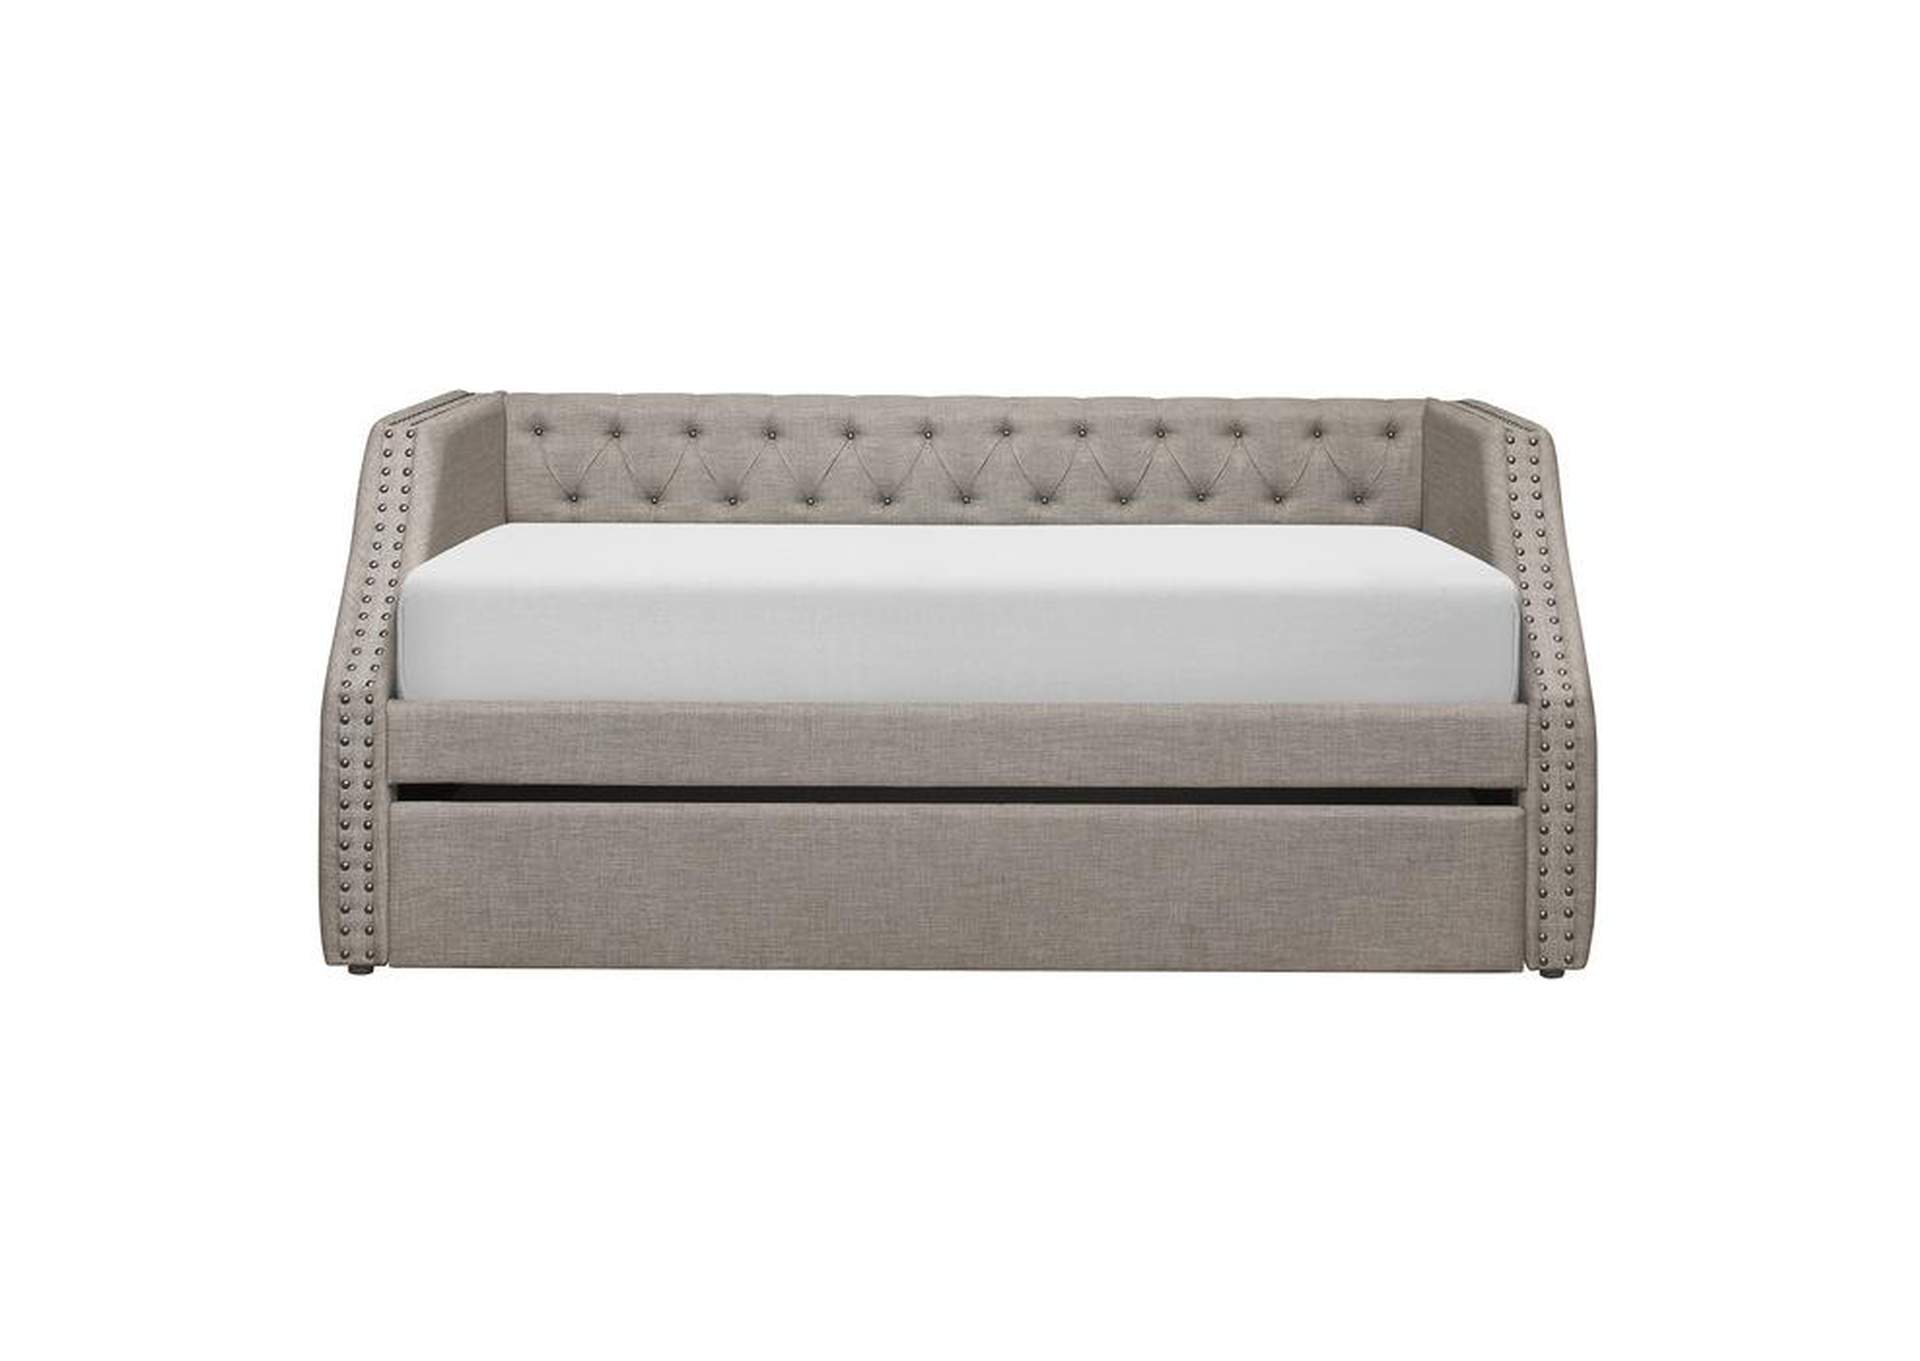 Berwick (2) Daybed with Trundle,Homelegance